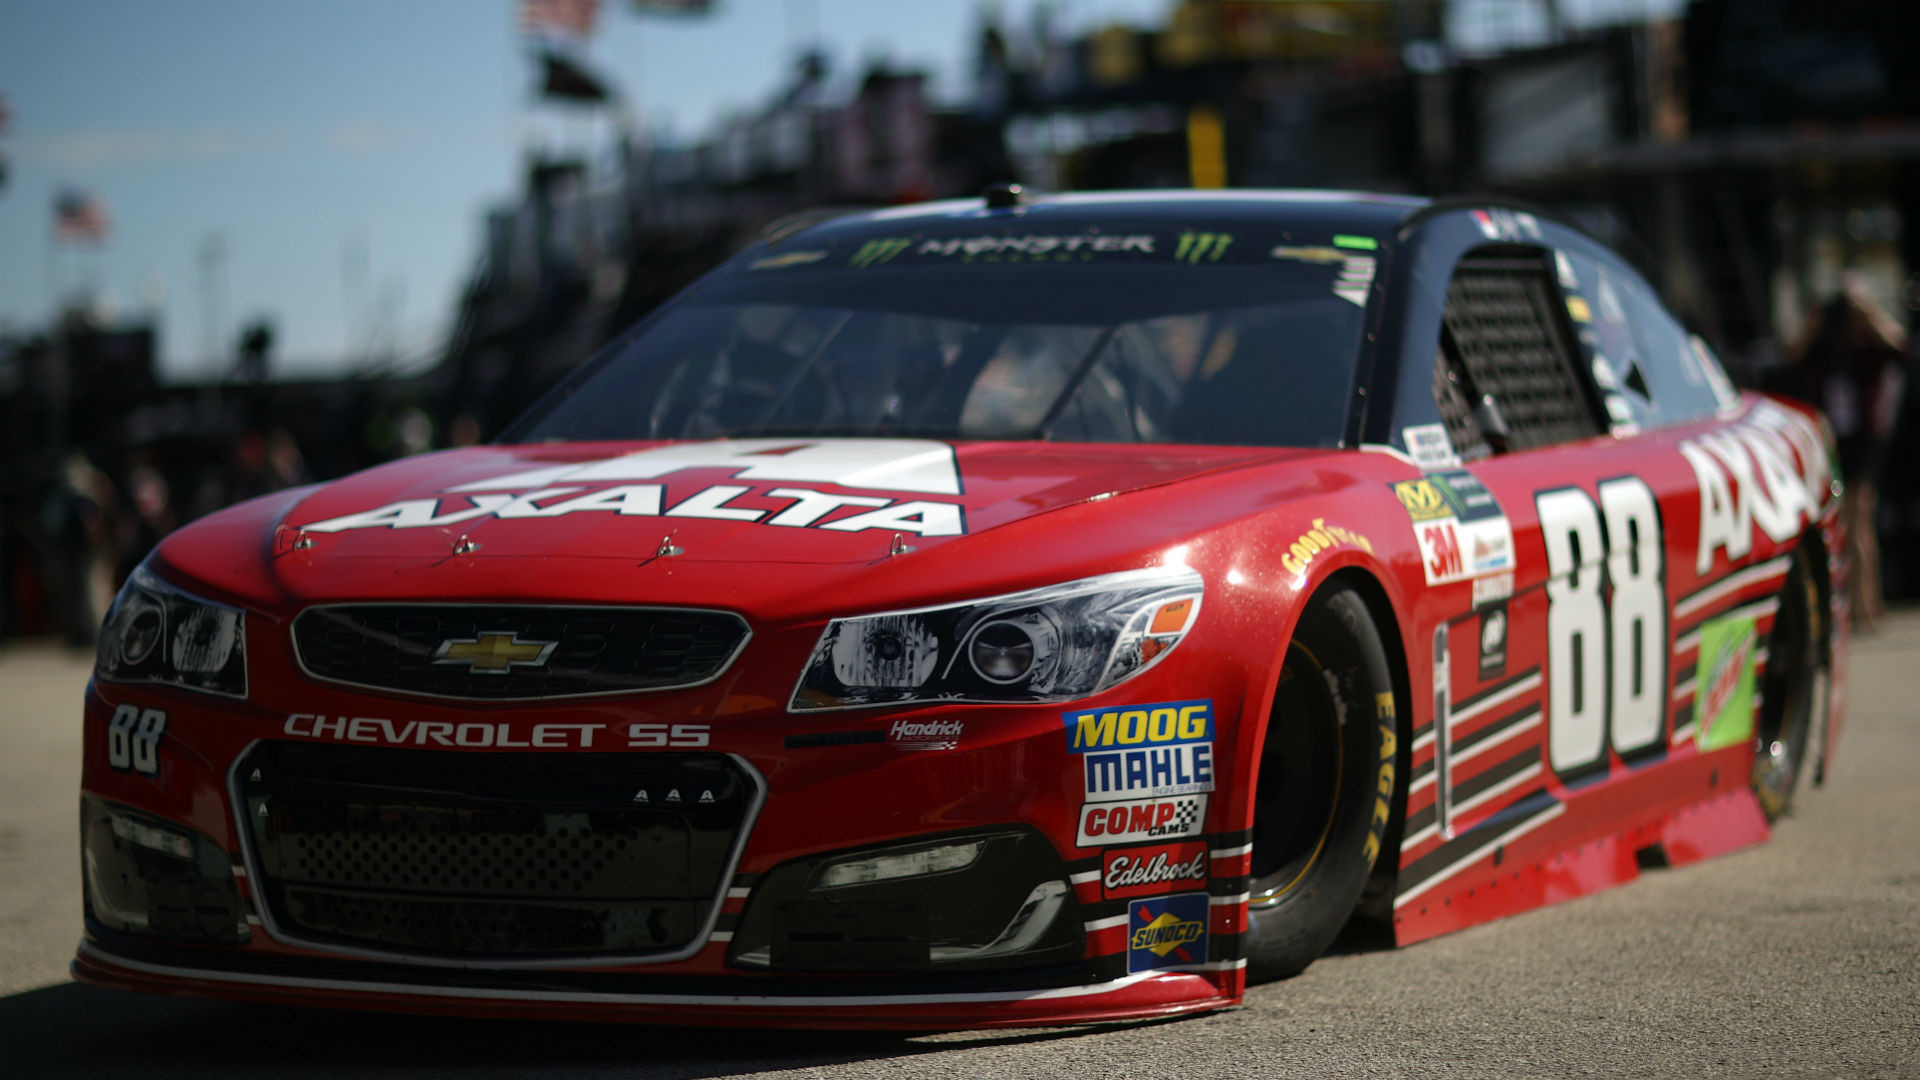 1920x1080 Dale Earnhardt Jr. finishes 25th in final NASCAR race, quickly chugs beer